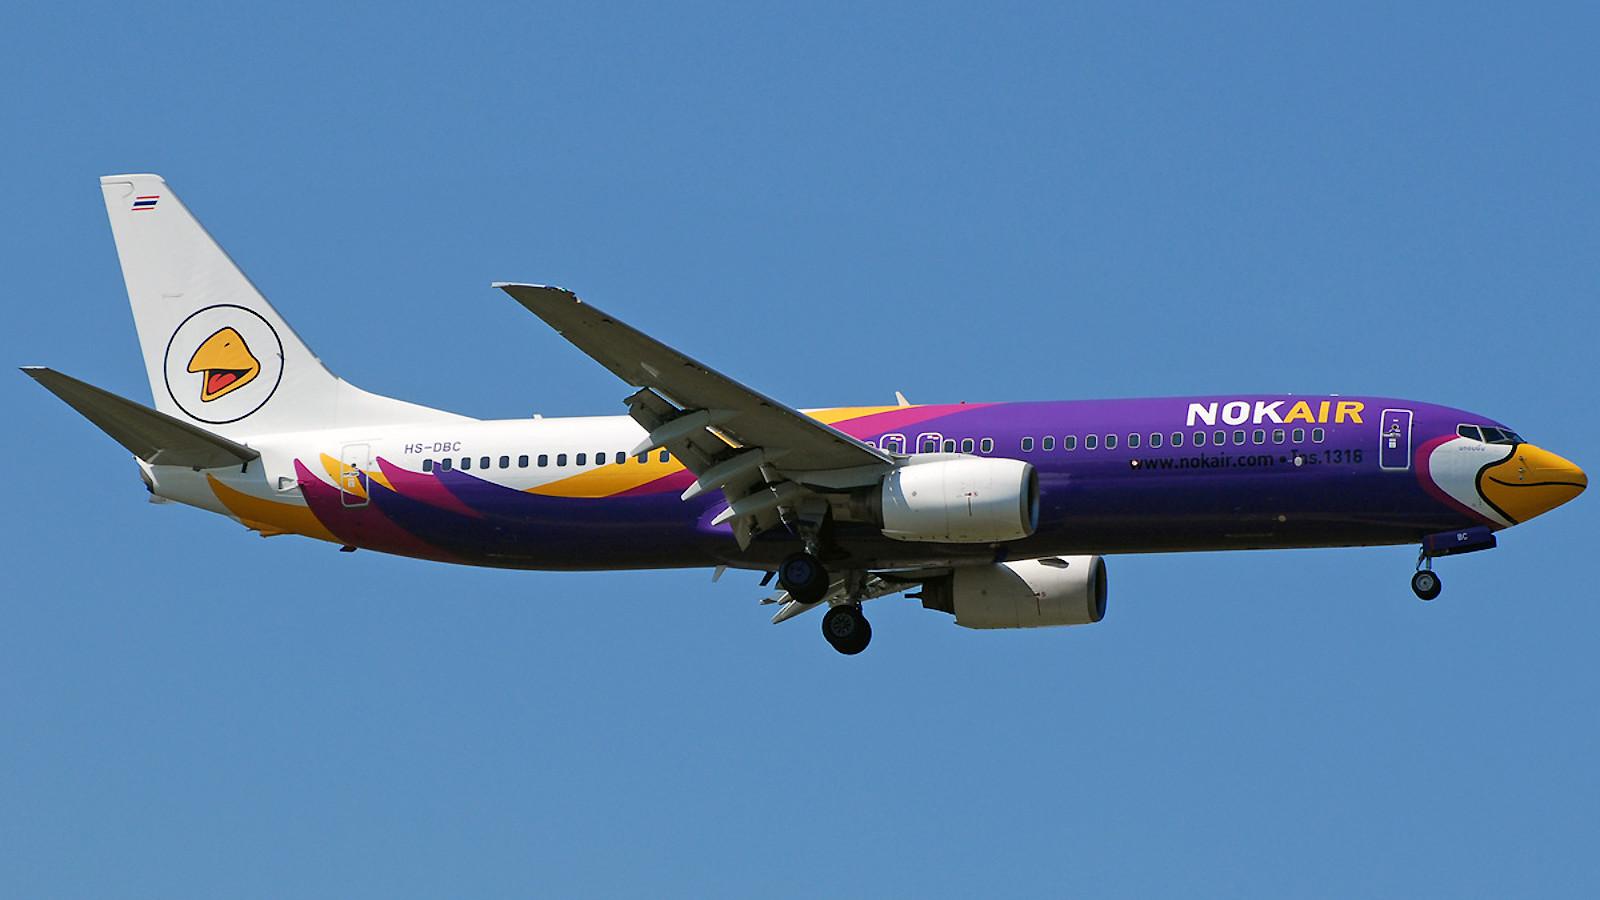 ST Engineering Bags Nok Air Contract for B737-800 MRO